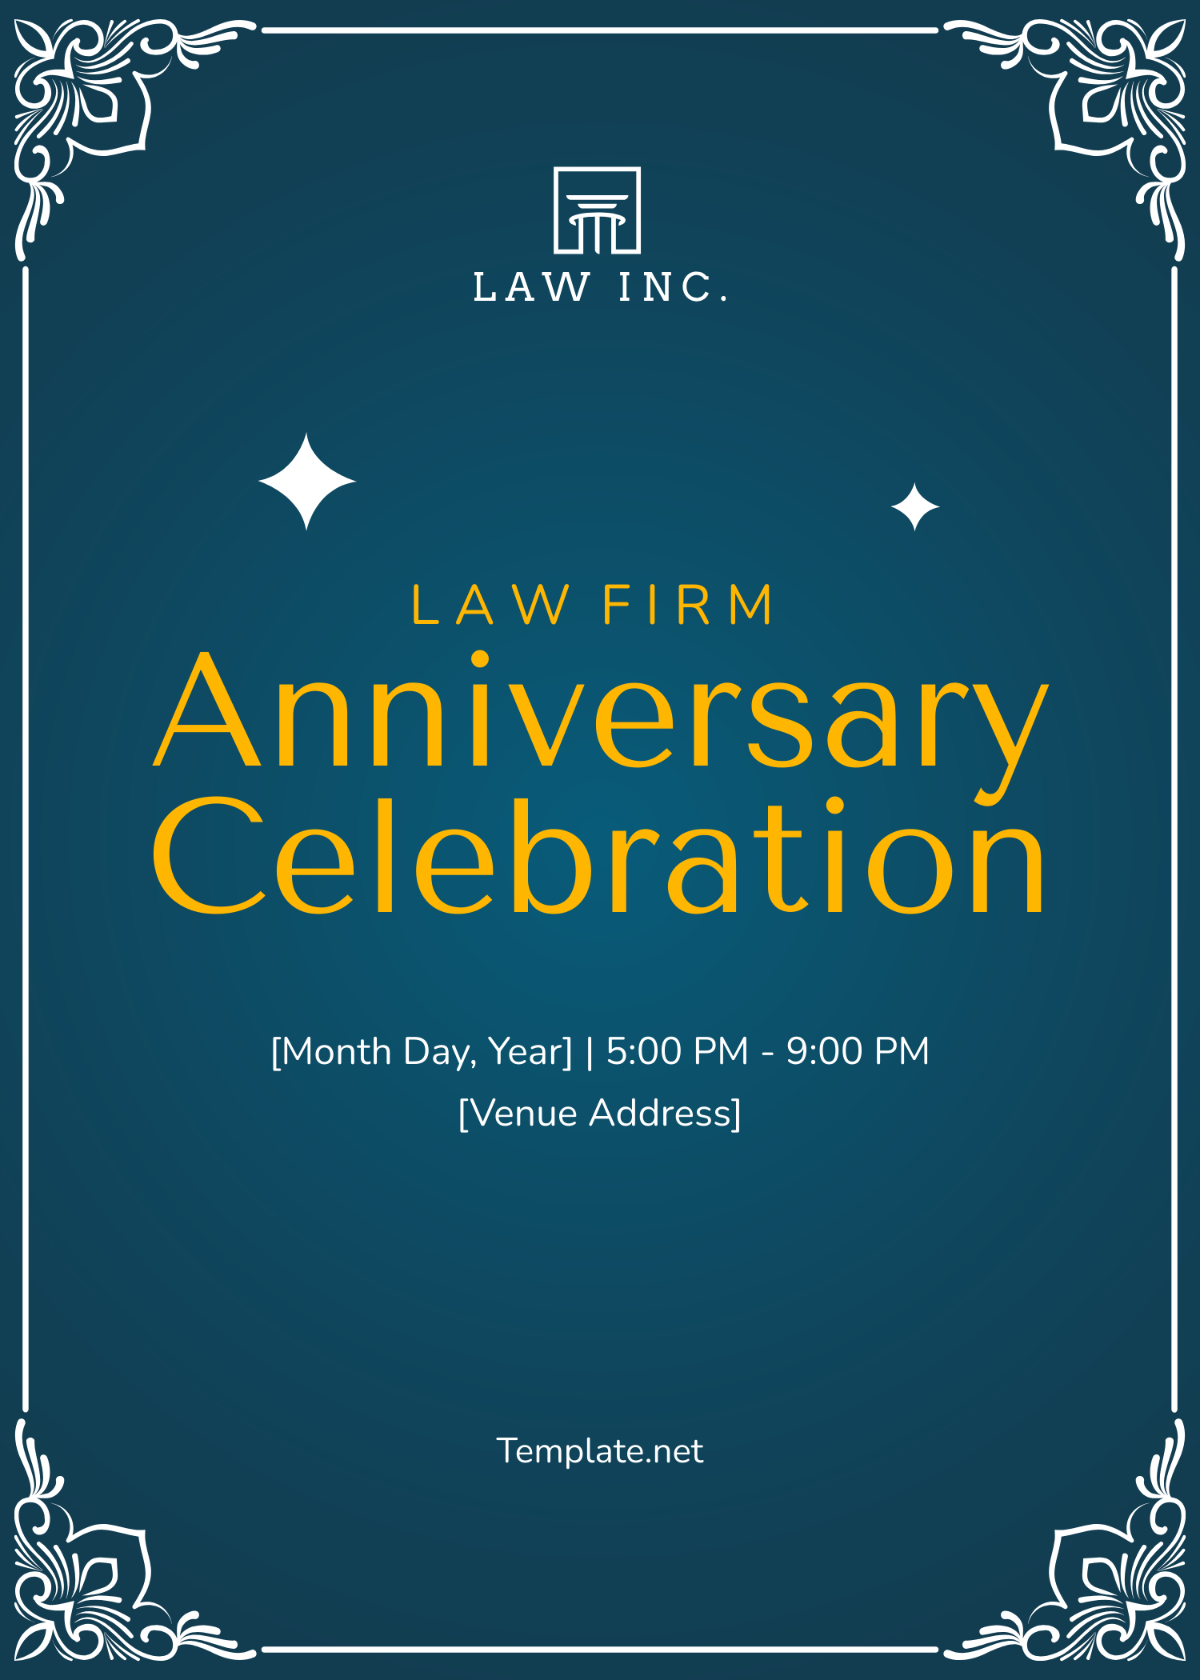 Law Firm Party Invitation